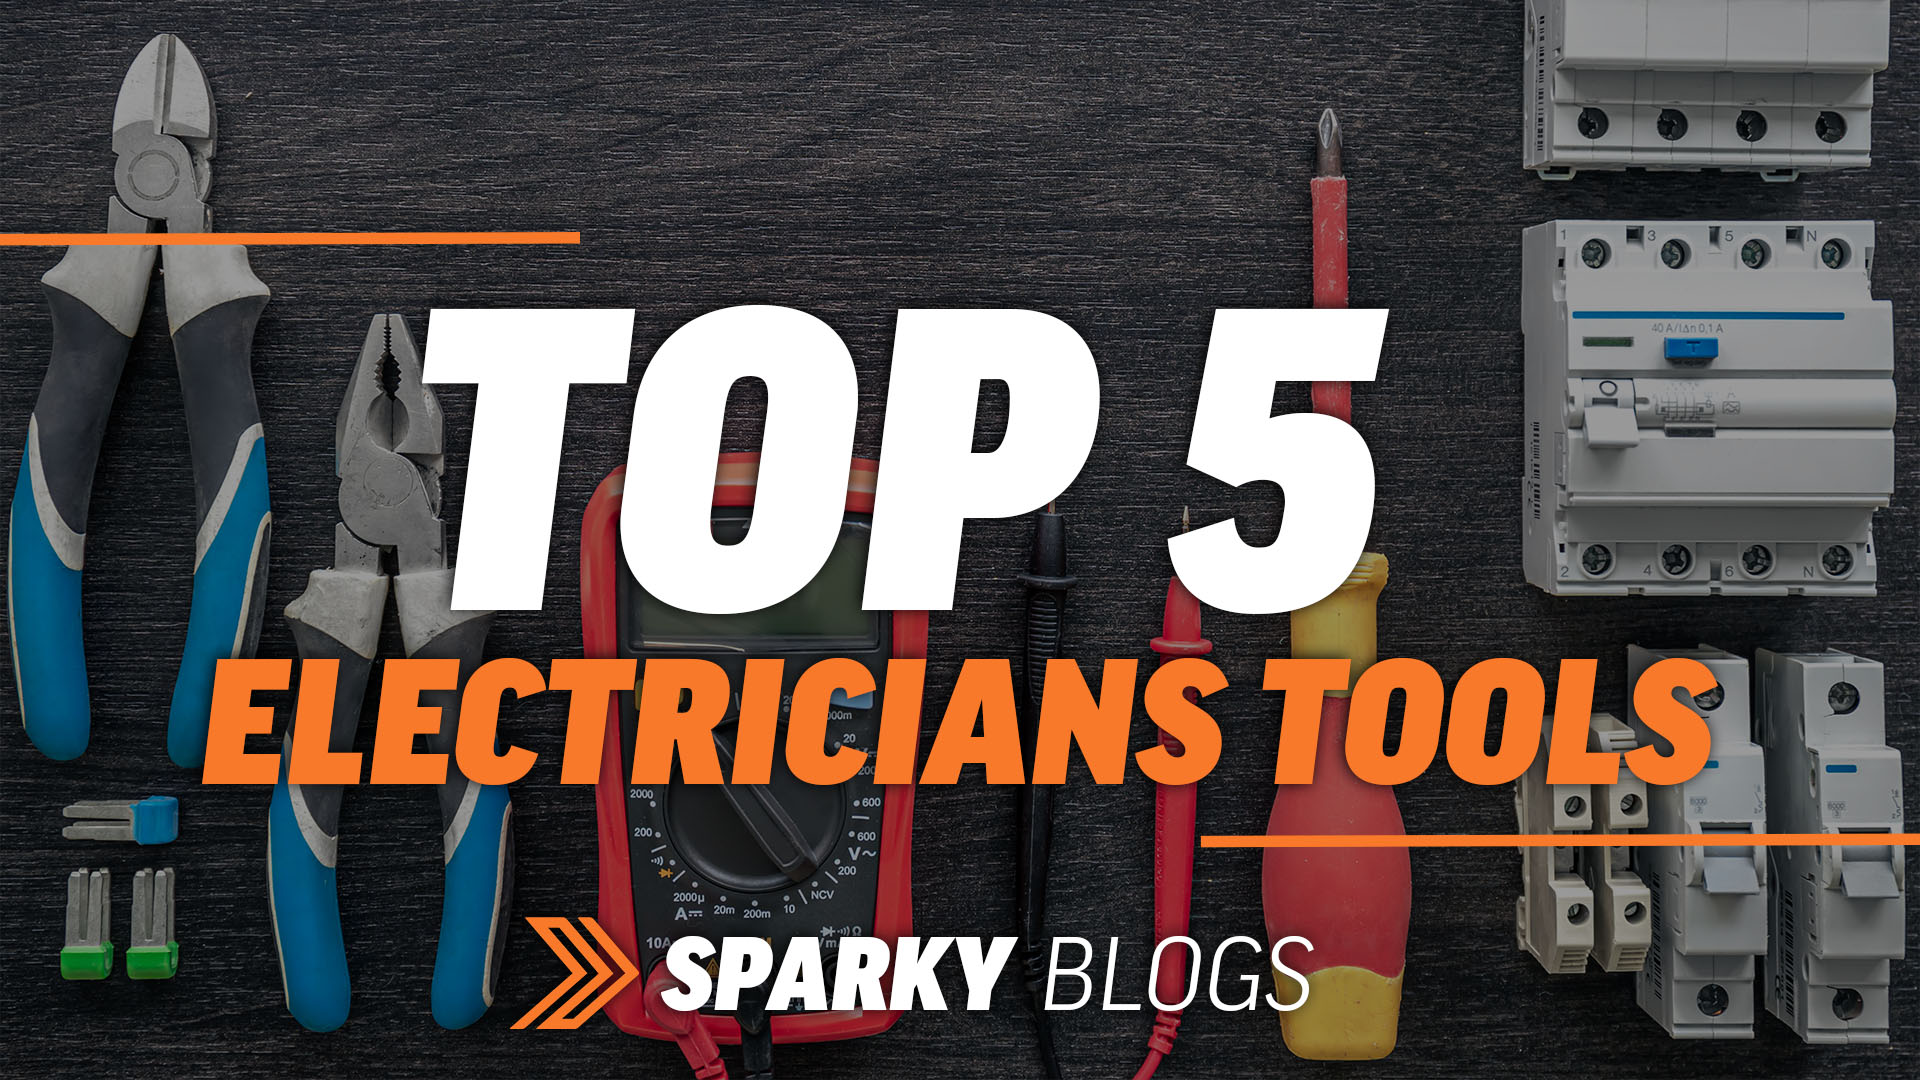 Top 5 Electrician's Tools image